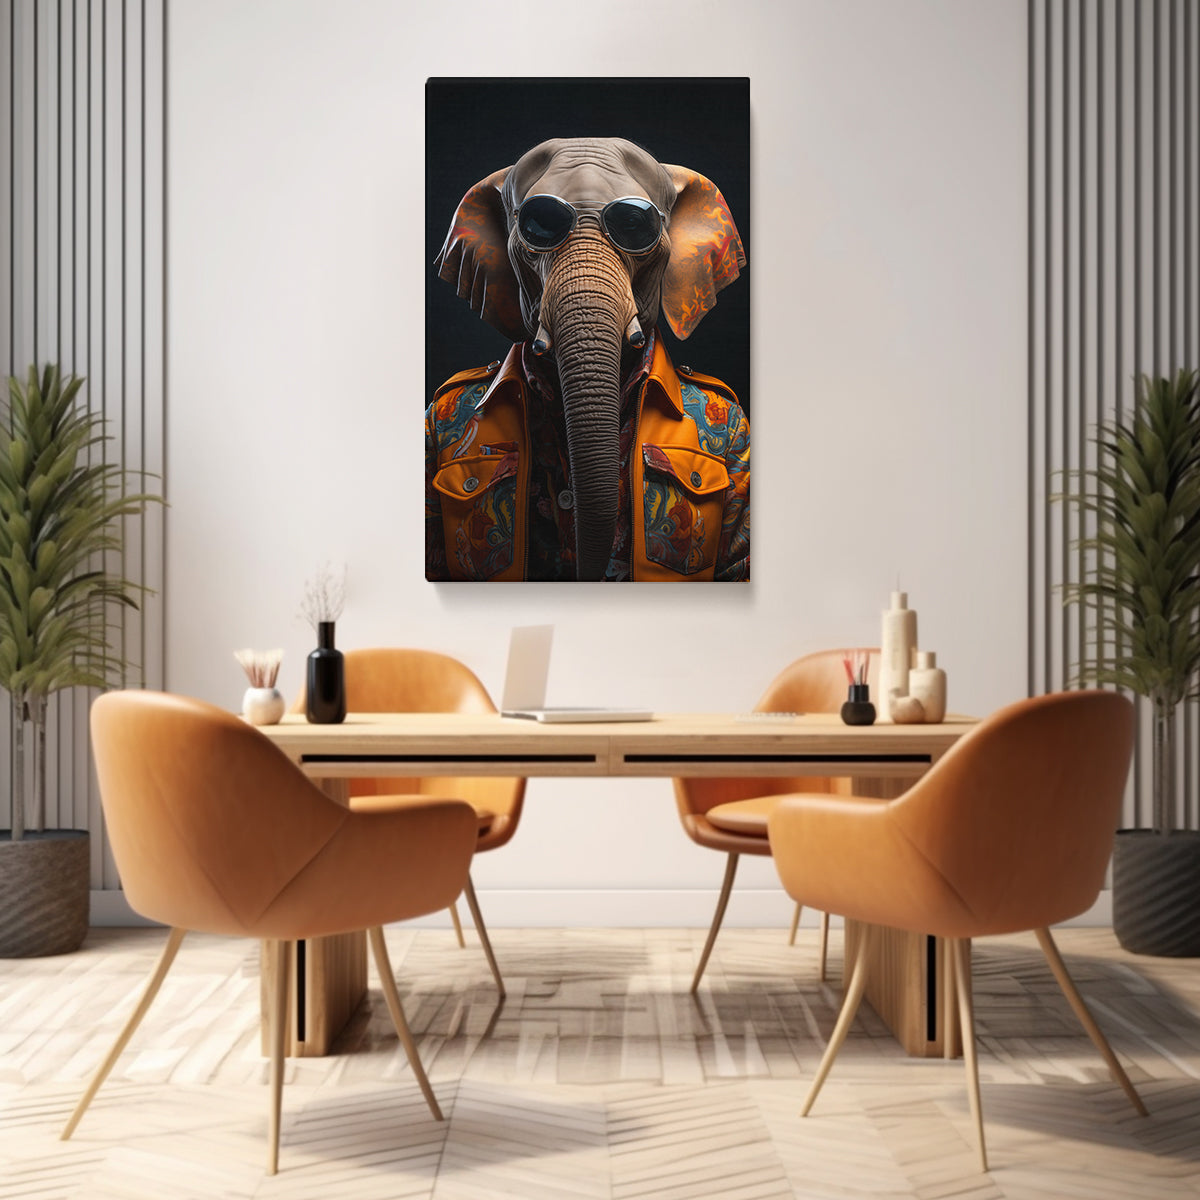 Eclectic Elephant in Sunglasses Canvas Print ArtLexy   